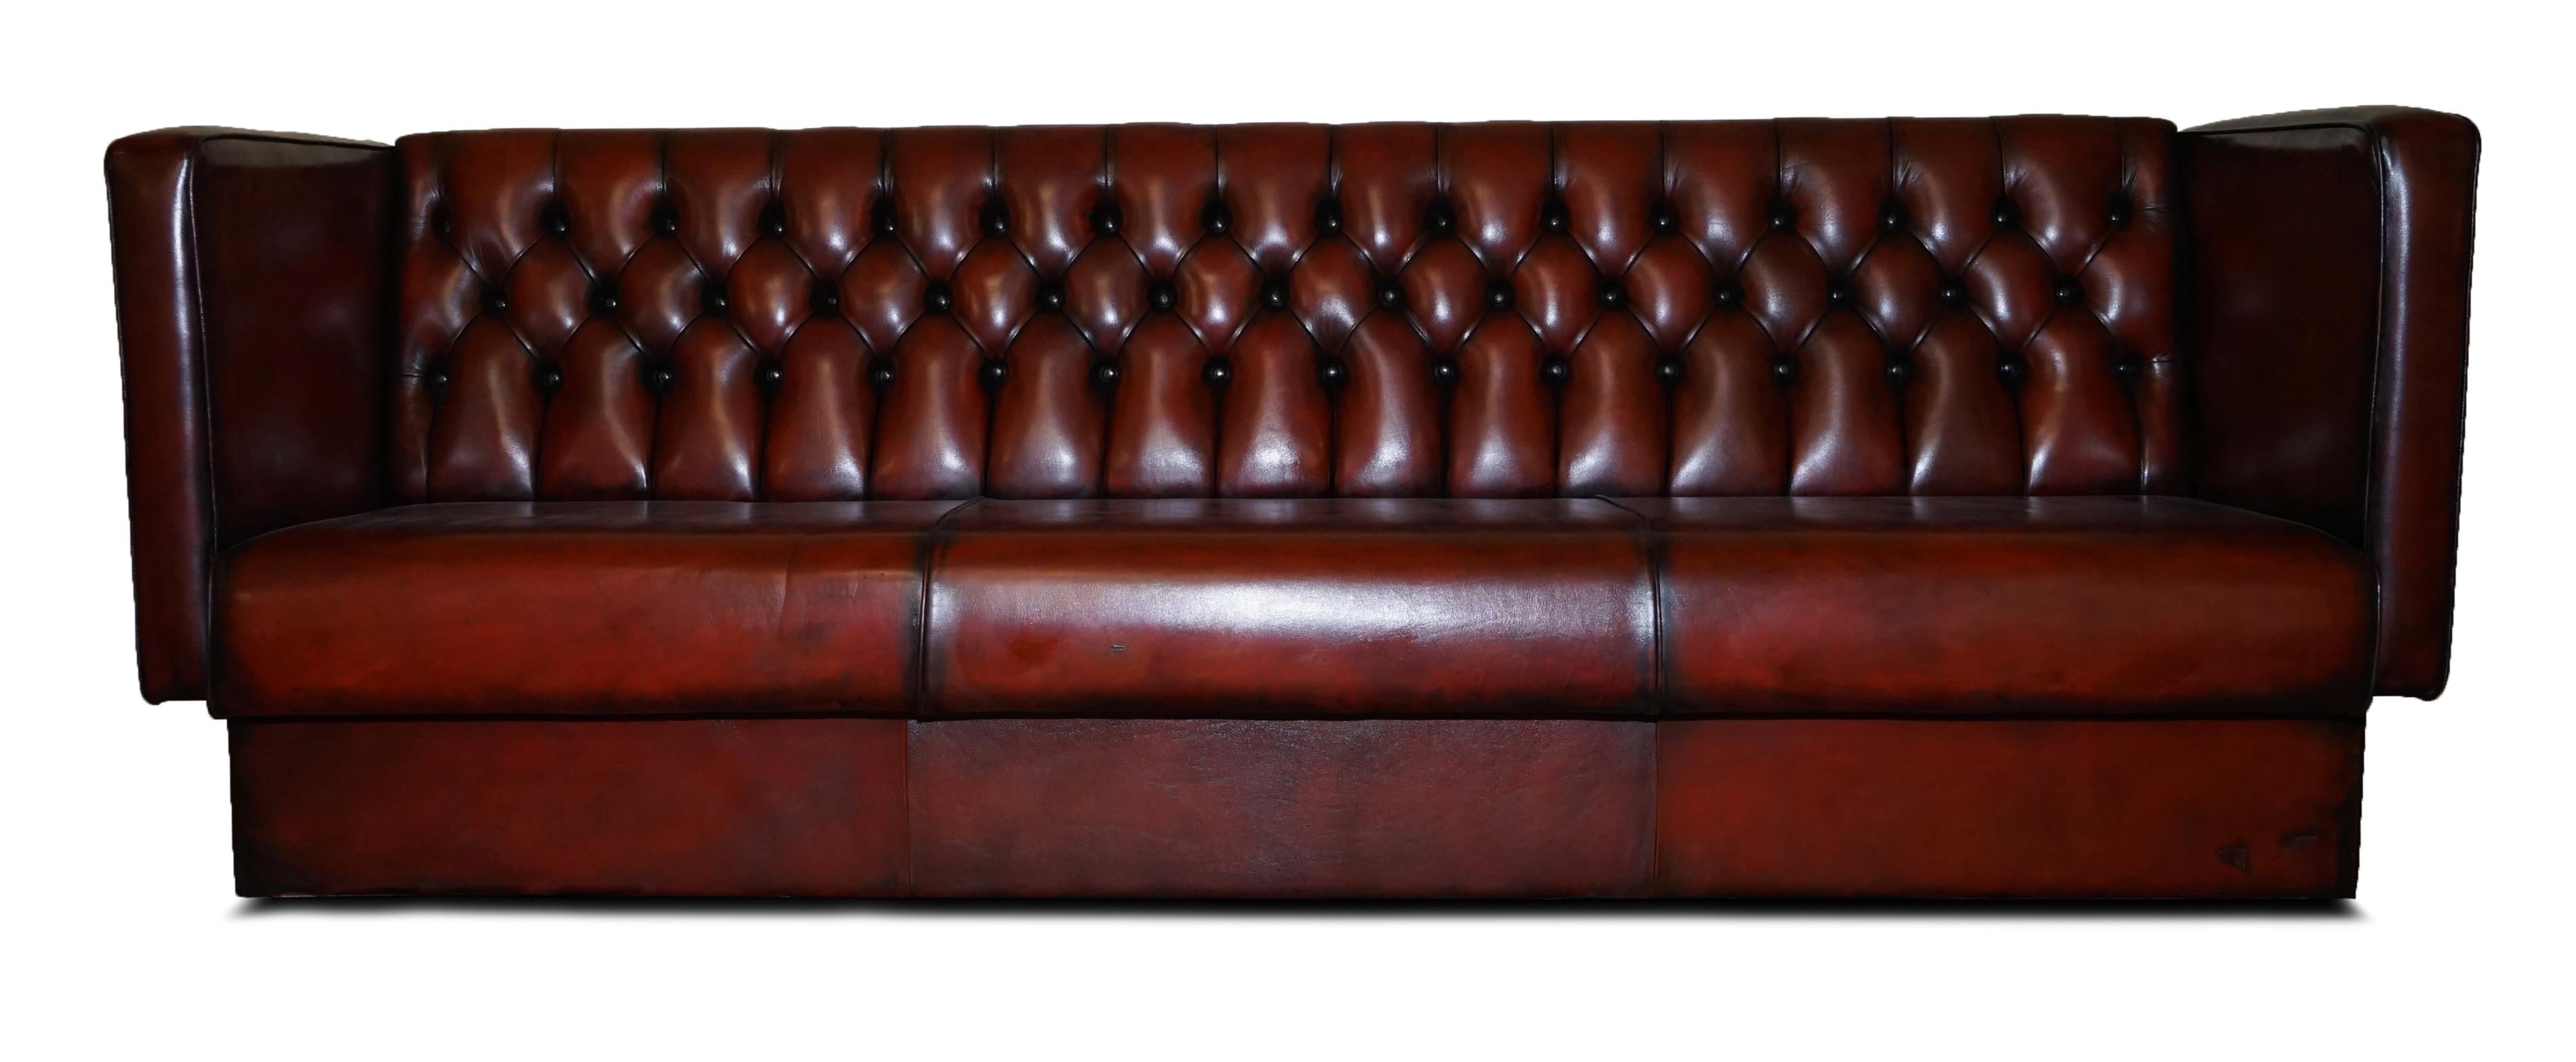 Fully Restored Pair of Huge 4-5 Seat Each Chesterfield Brown Leather Bench Sofas For Sale 5